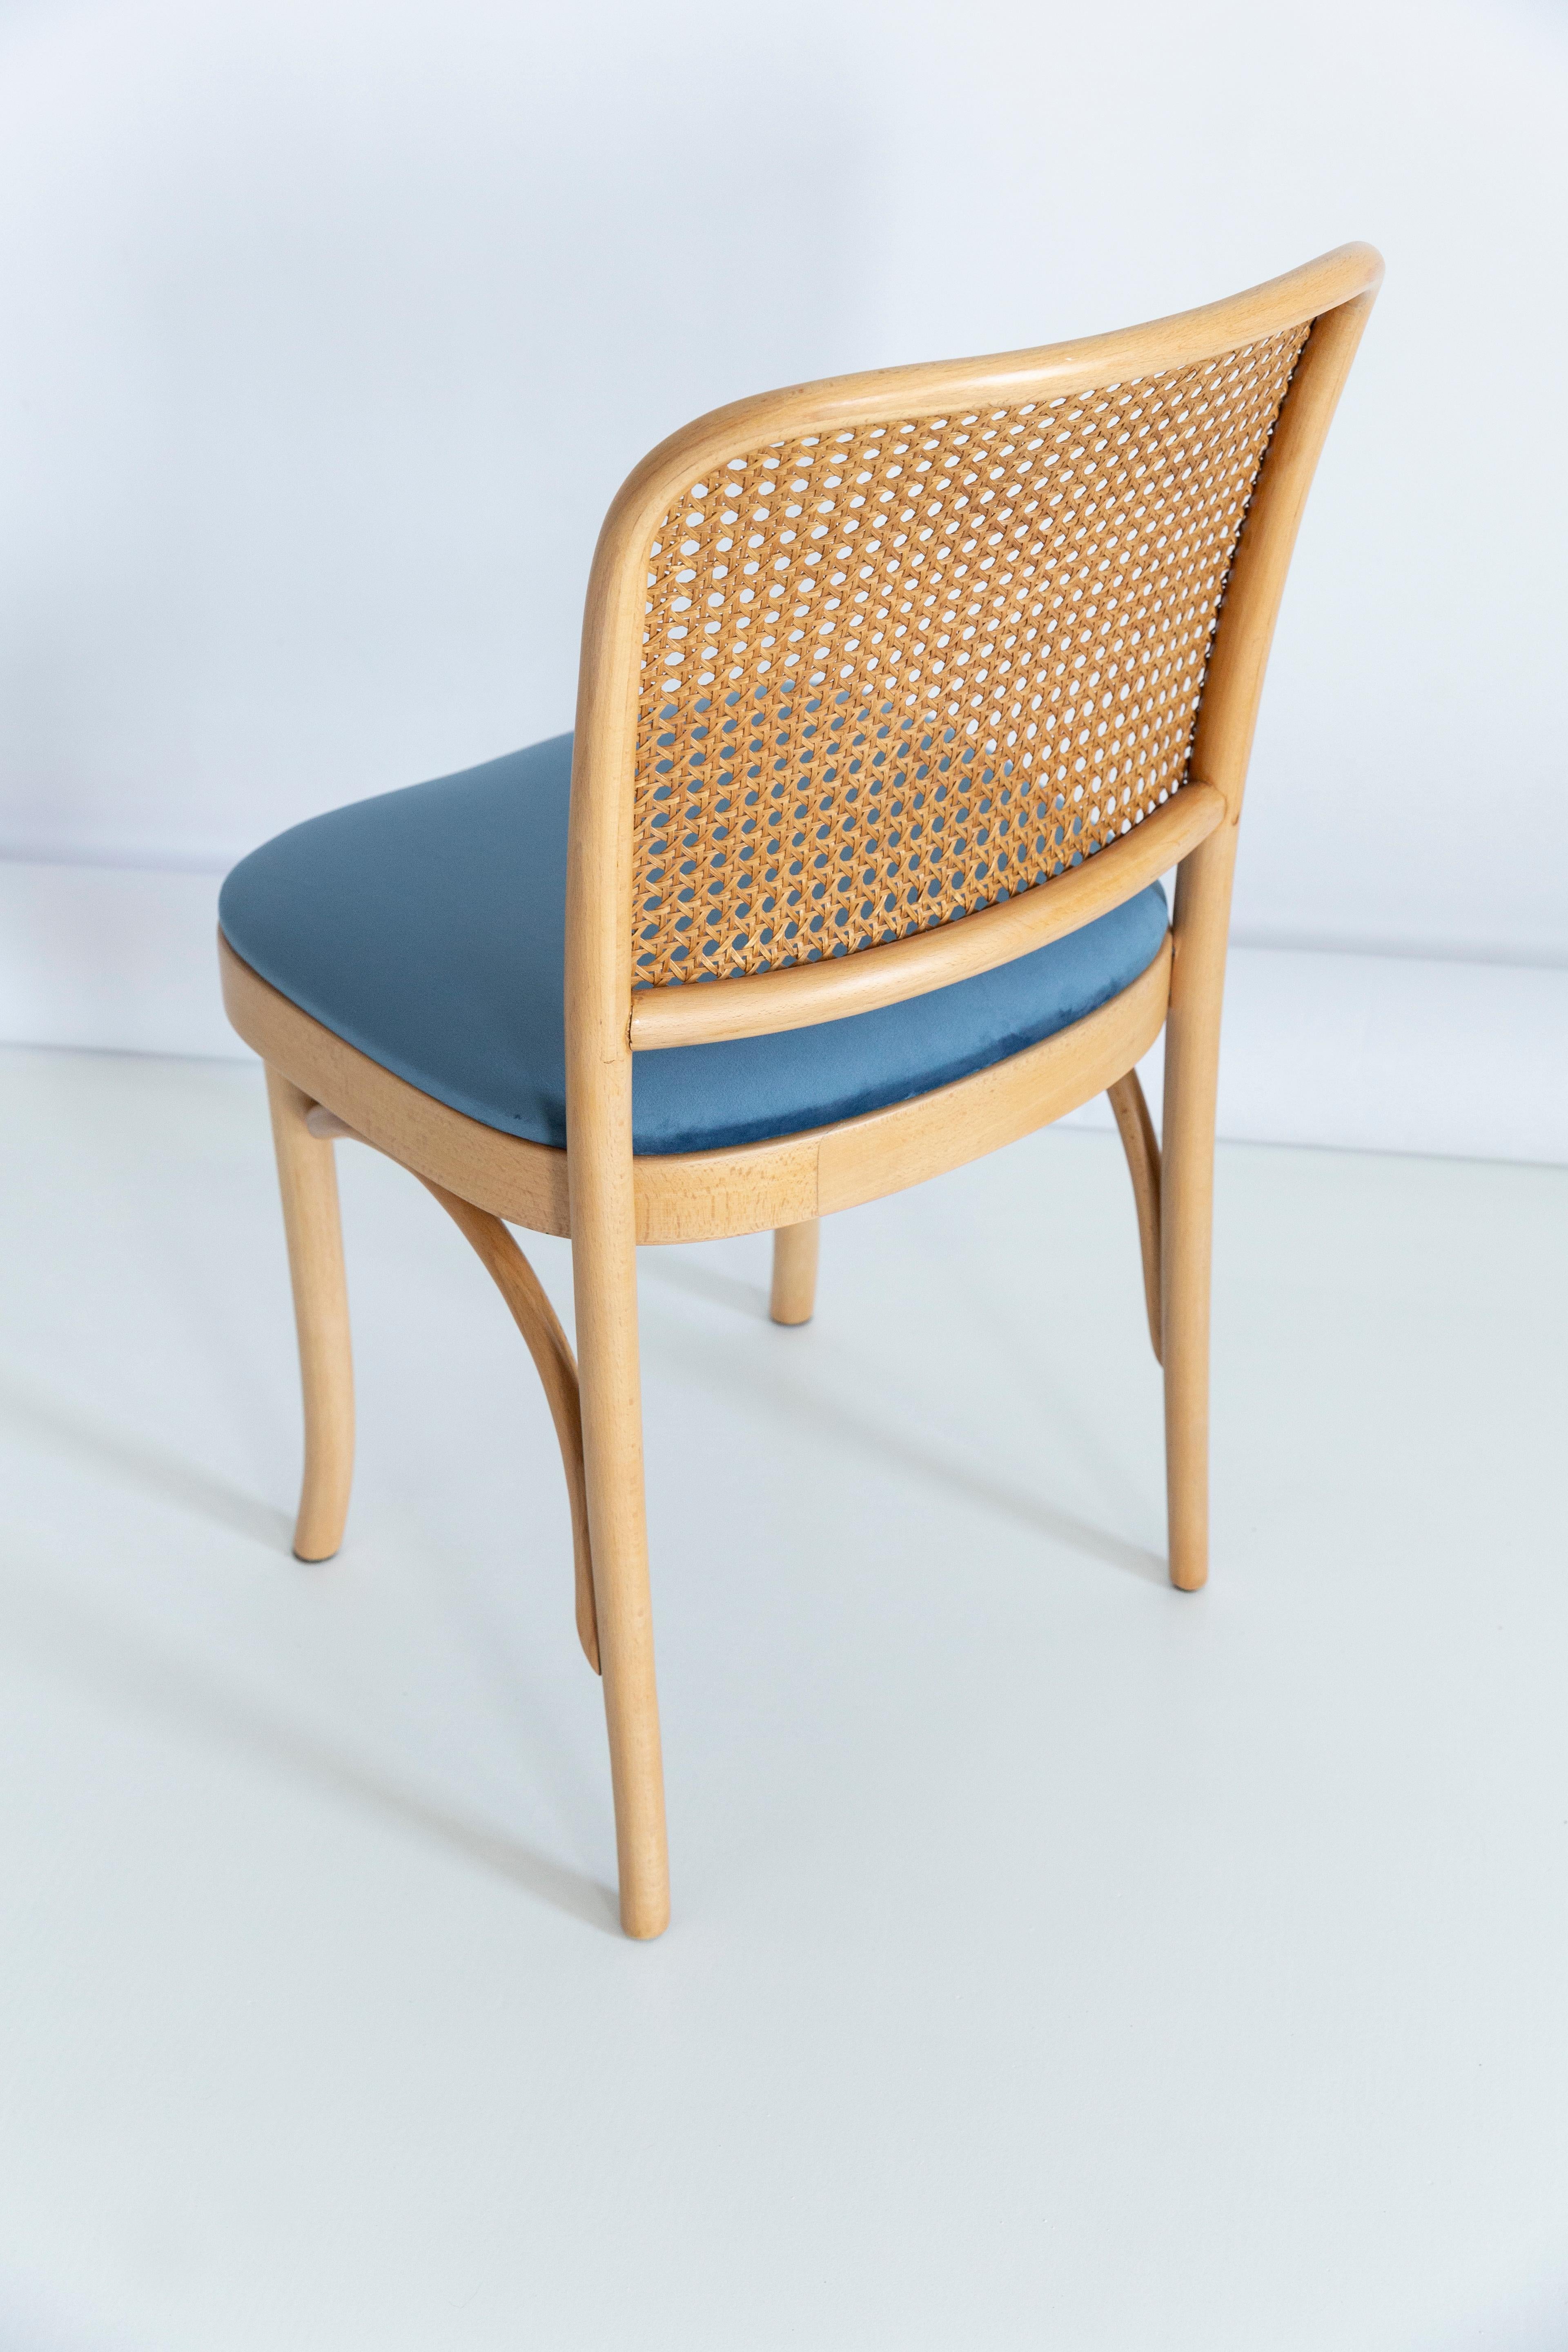 Set of Five Blue Velvet Thonet Wood Rattan Chairs, 1960s For Sale 10